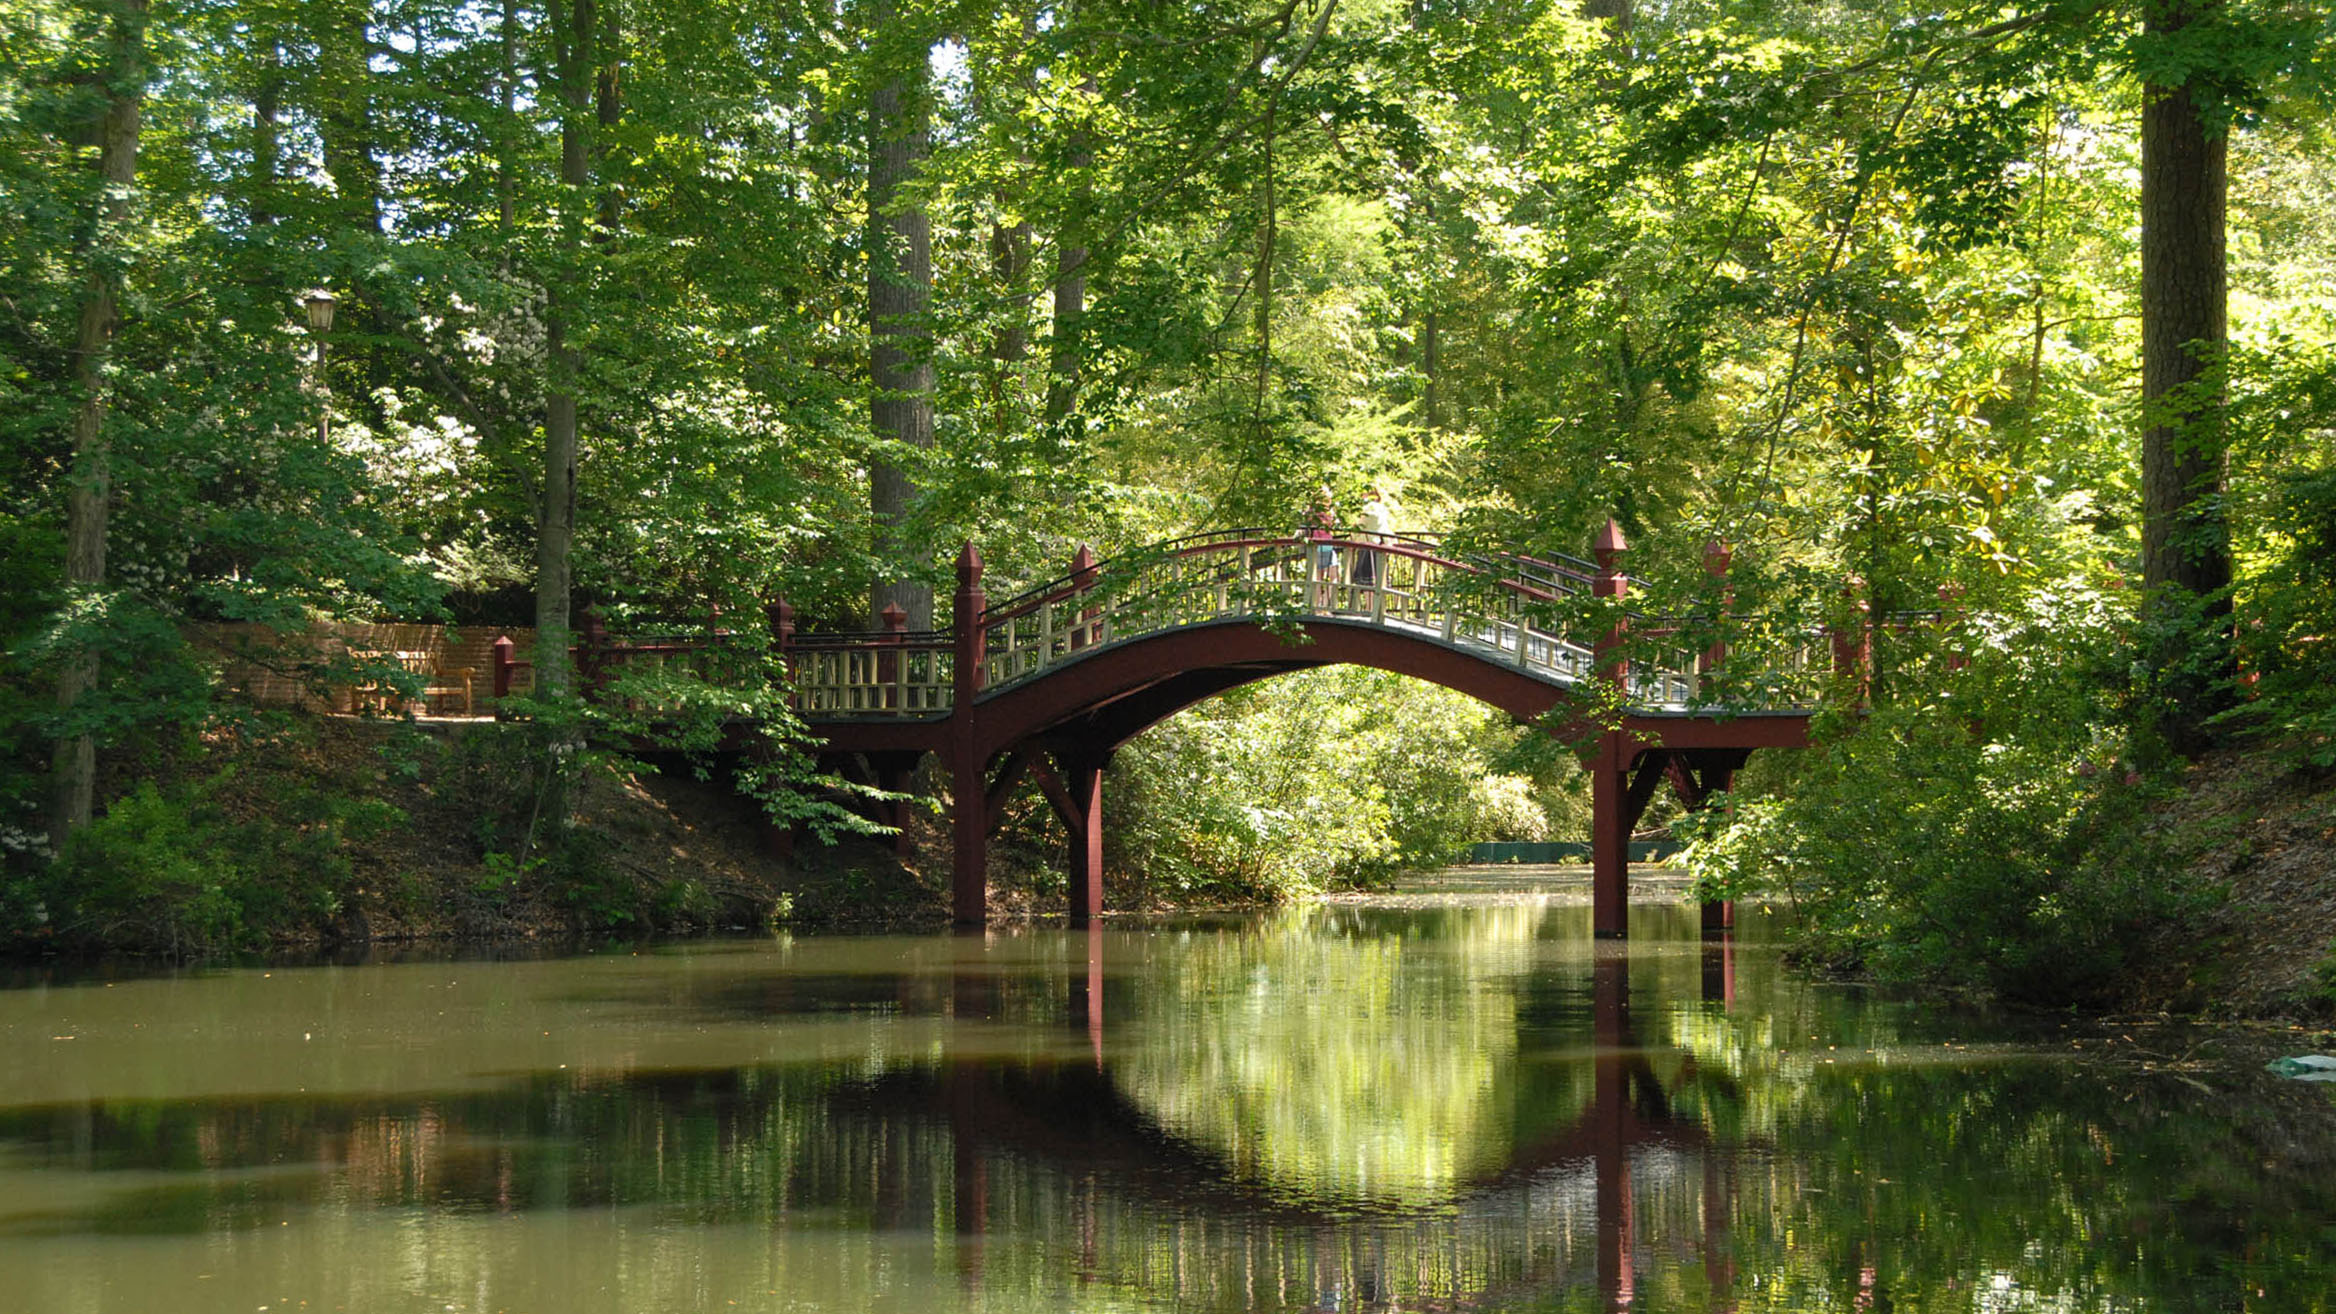 Located in the heart of William and Mary’s scenic campus, Crim Dell Bridge is a popular site for students and visitors alike. Lore has it if students kiss on the bridge they will marry each other. Photo courtesy of the College of William and Mary/Scott Elmquist.